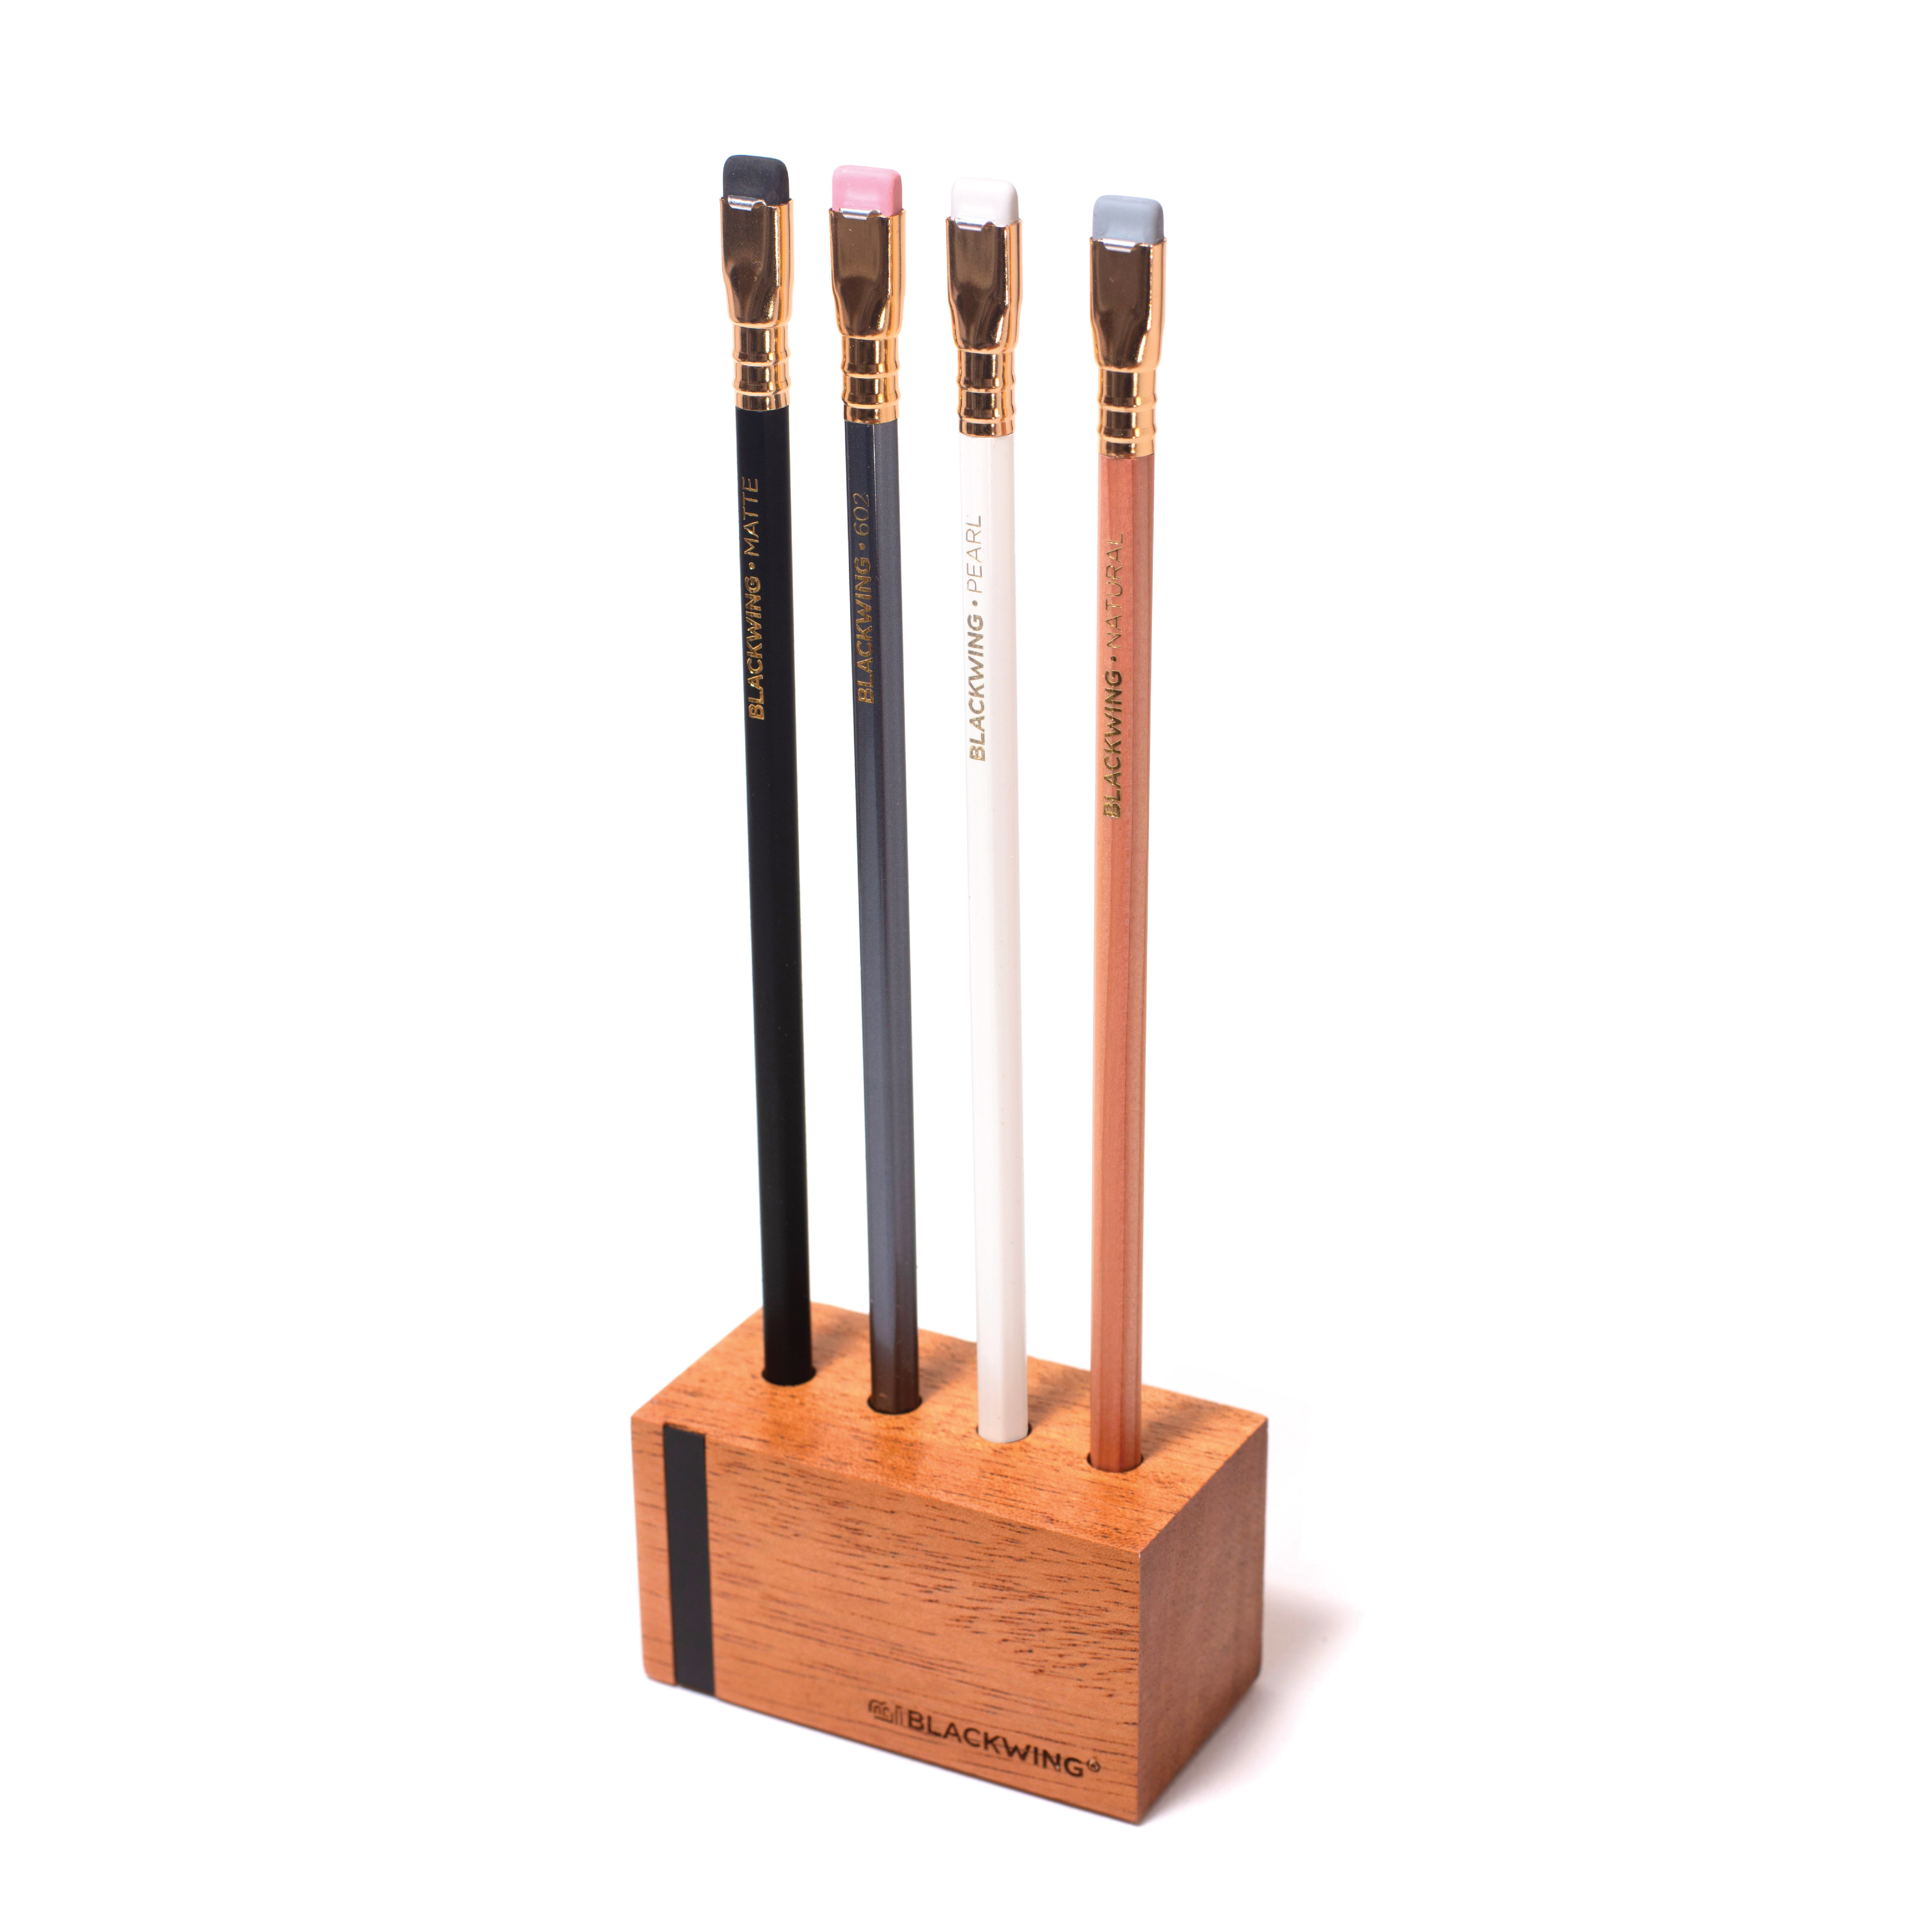 Blackwing Upright Four Pencil Display